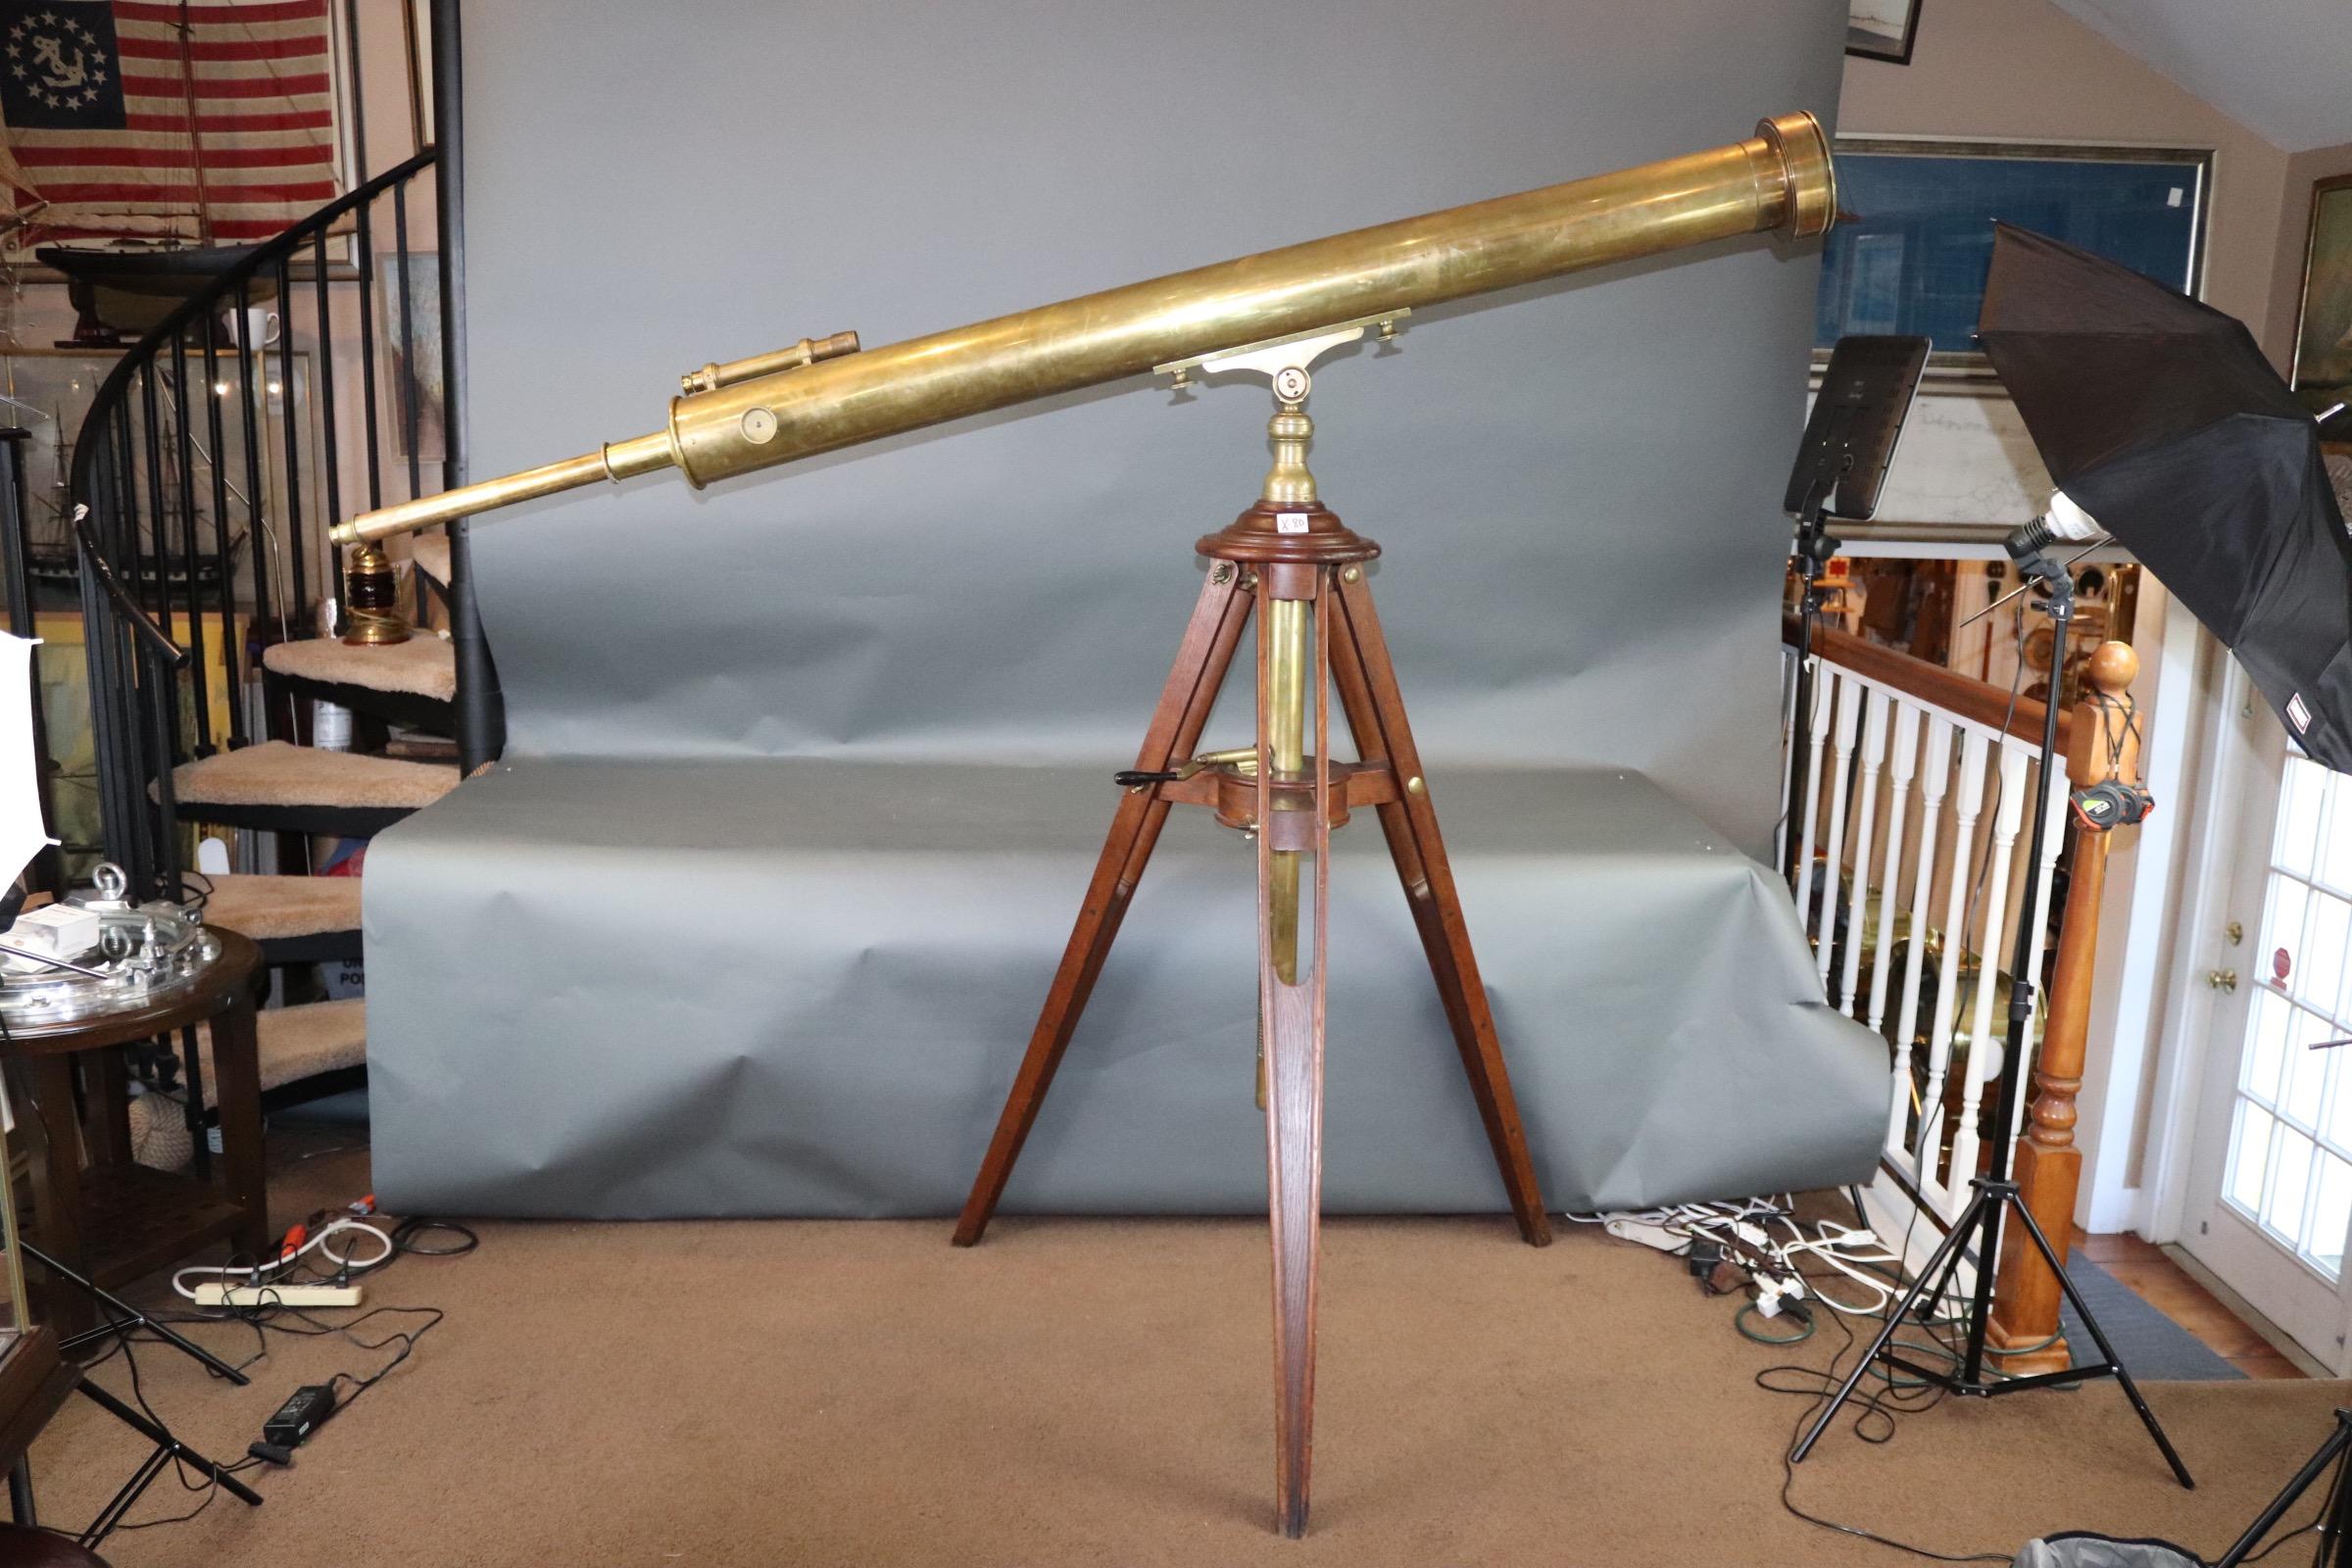 Rare museum deassecssion of a huge celestial telescope on geared tripod by French maker SECRETAN of PARIS. Fitted to a sturdy geared tripod. Weight is 120 pounds.
Measures: Height to a level barrel 70